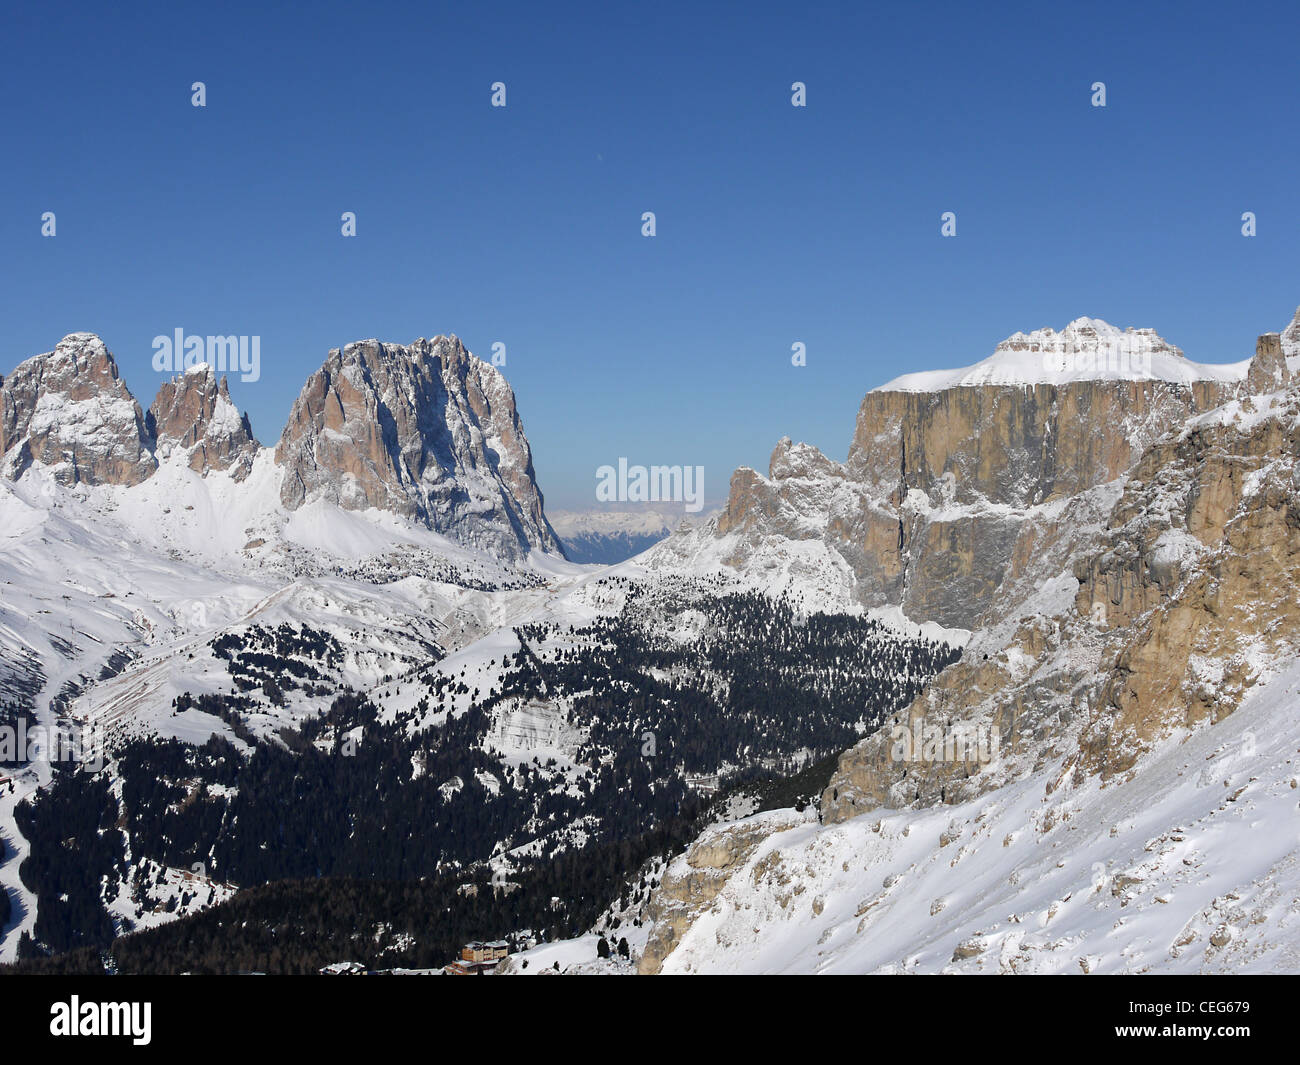 On the clockwise rotation of the Sellaronda ski trails looking toward central group of mountains and Val Gardena, Wolkenstein Stock Photo